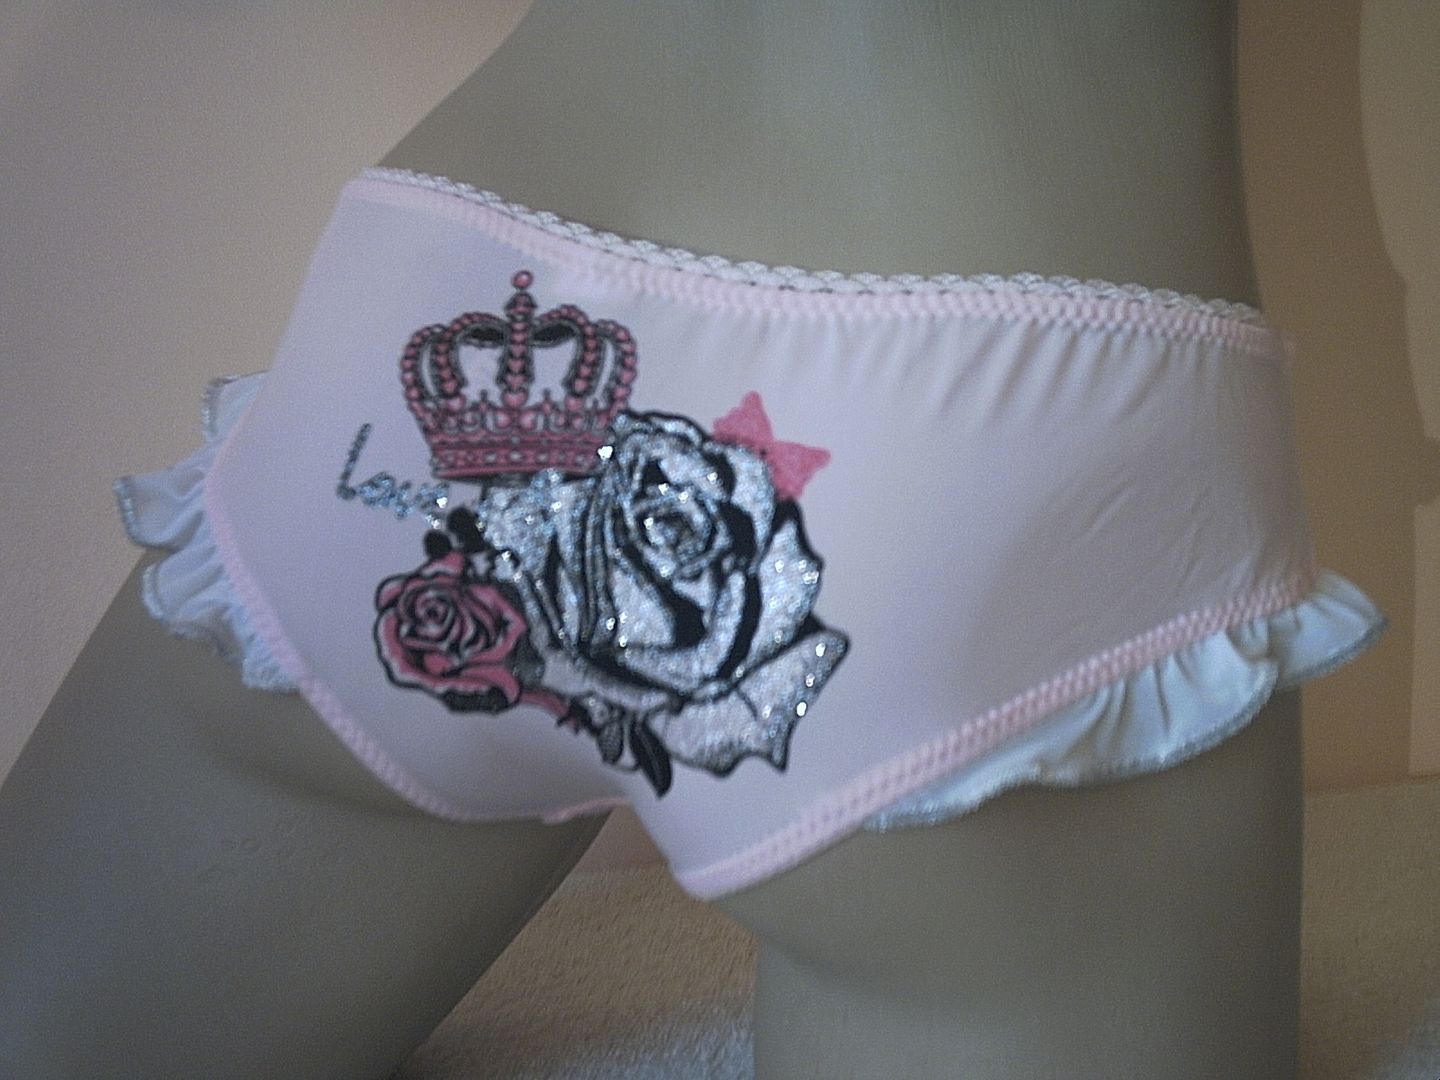 Gorgeous Cute Baby Pink Satin Frilly Shorty Cami Knickers Playsiut S